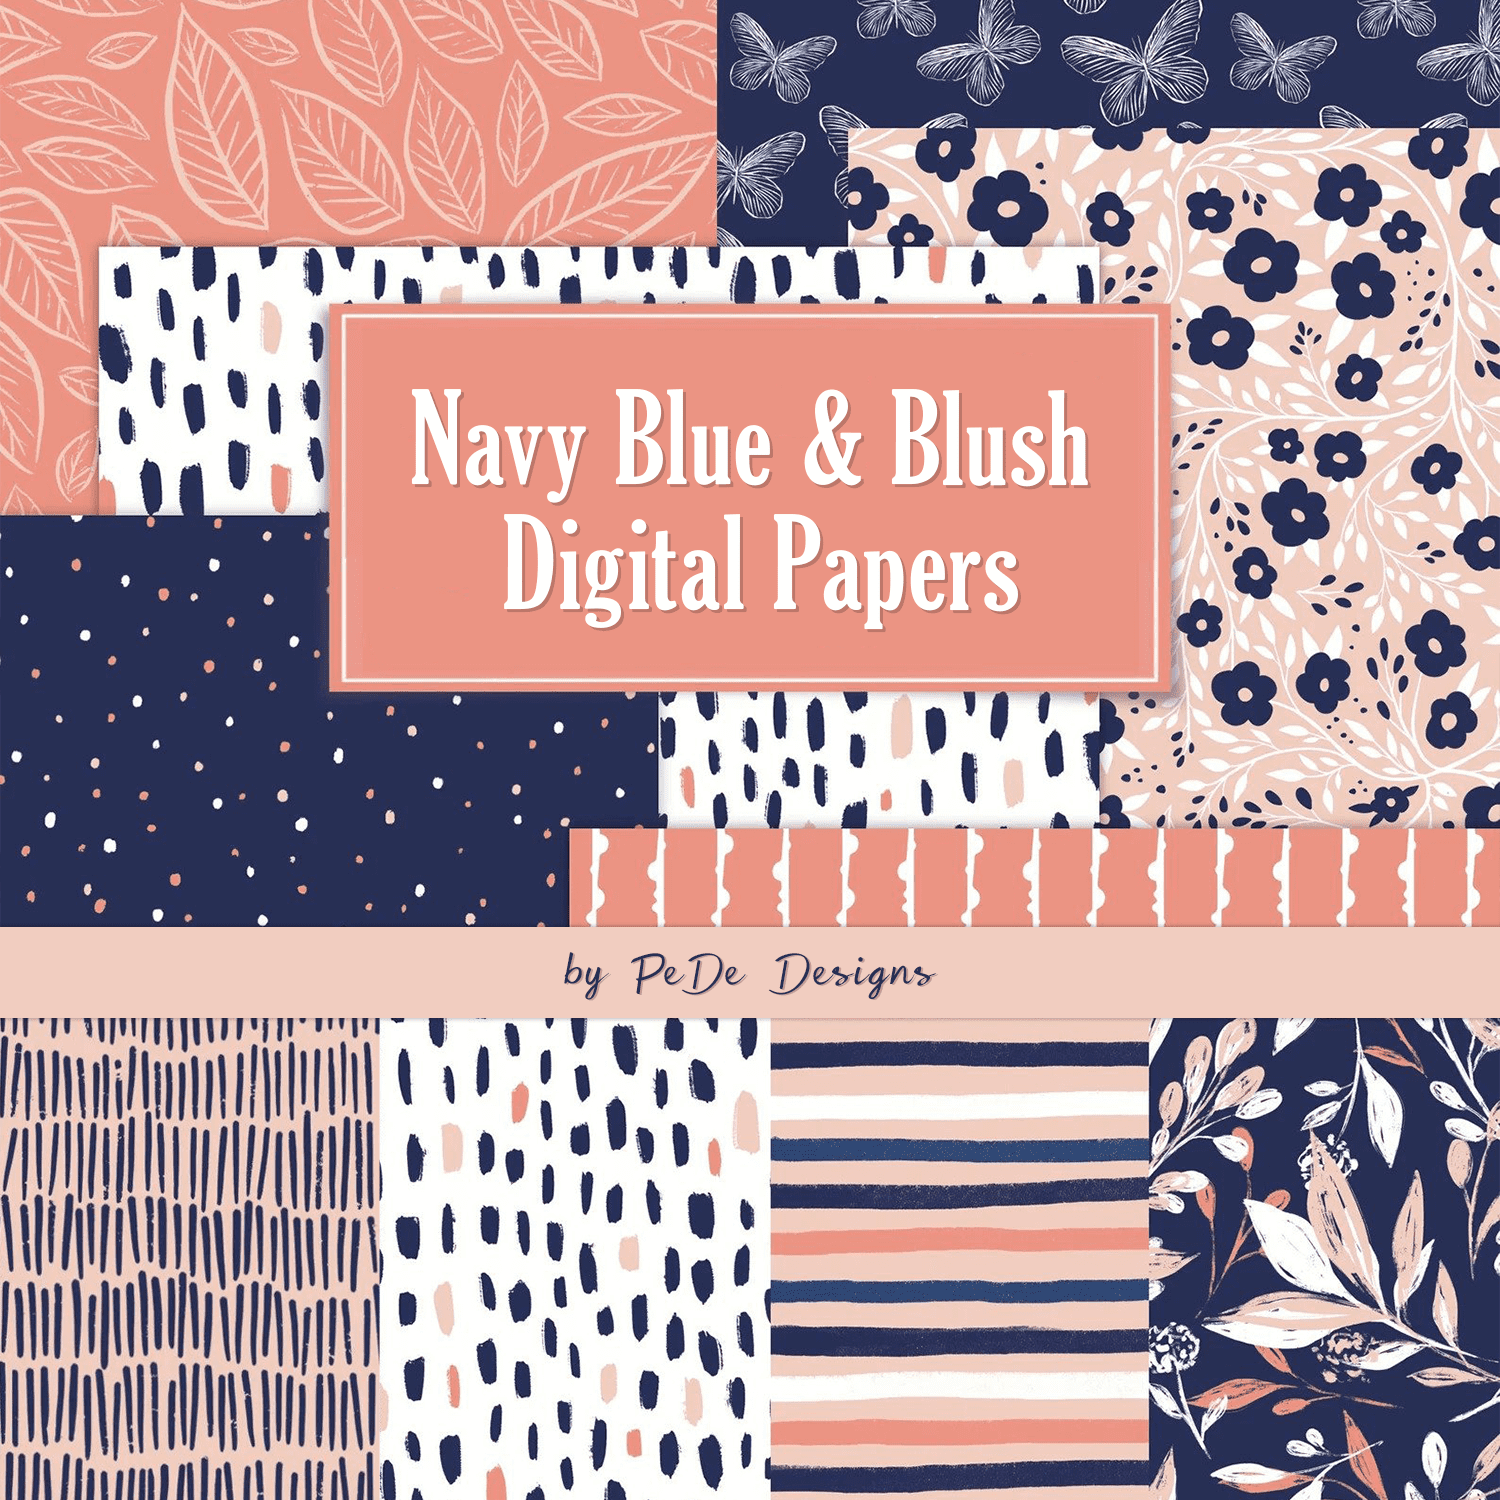 Navy Blue & Blush. Digital Papers cover.